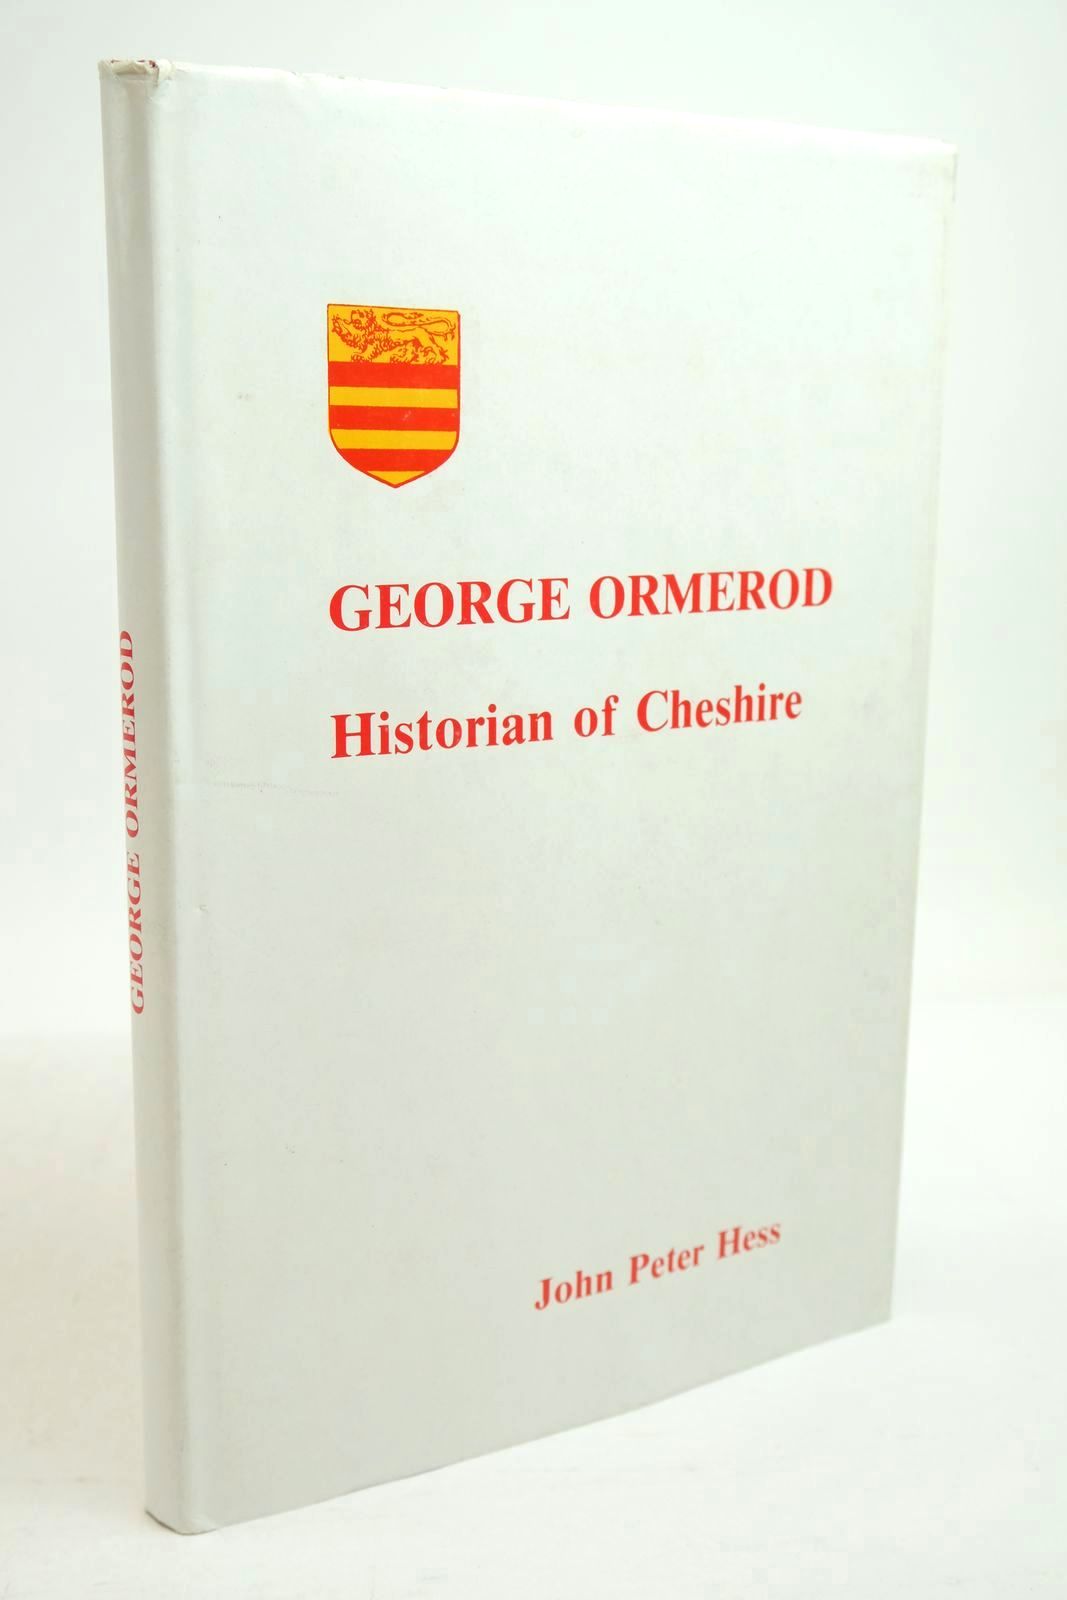 Photo of GEORGE ORMEROD HISTORIAN OF CHESHIRE written by Hess, John Peter published by Herald Printers (whitchurch) Ltd (STOCK CODE: 1321249)  for sale by Stella & Rose's Books